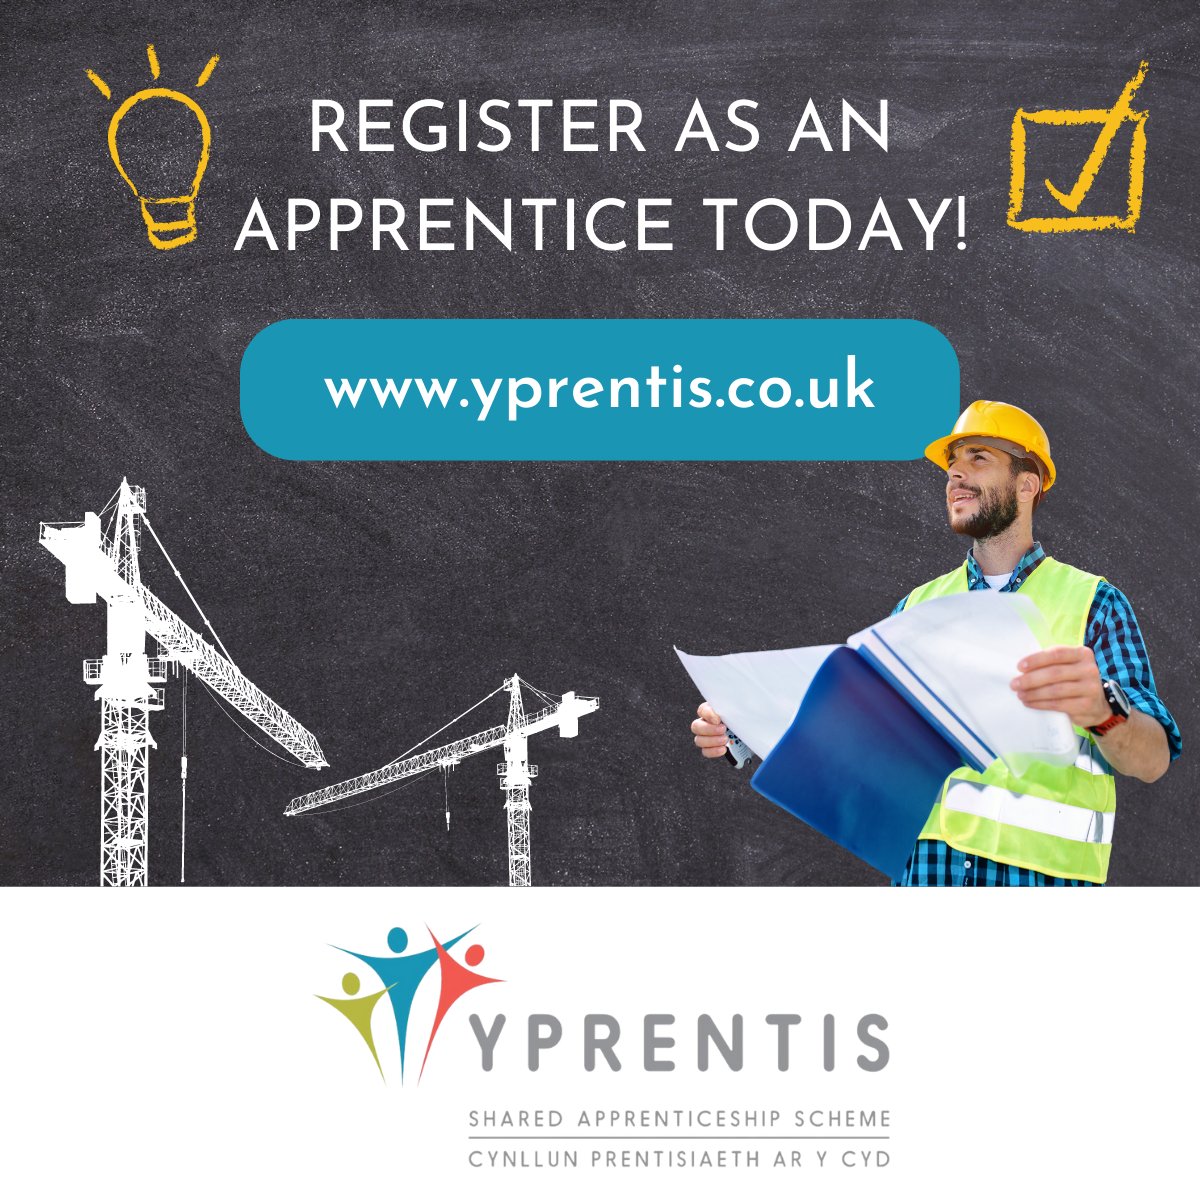 Good luck to all those collecting their GCSE results today! All the best! #gcseresultsday #apprentice #wales #constructionindustry #walesjobs #trainee #apprenticeships #resultsday2022